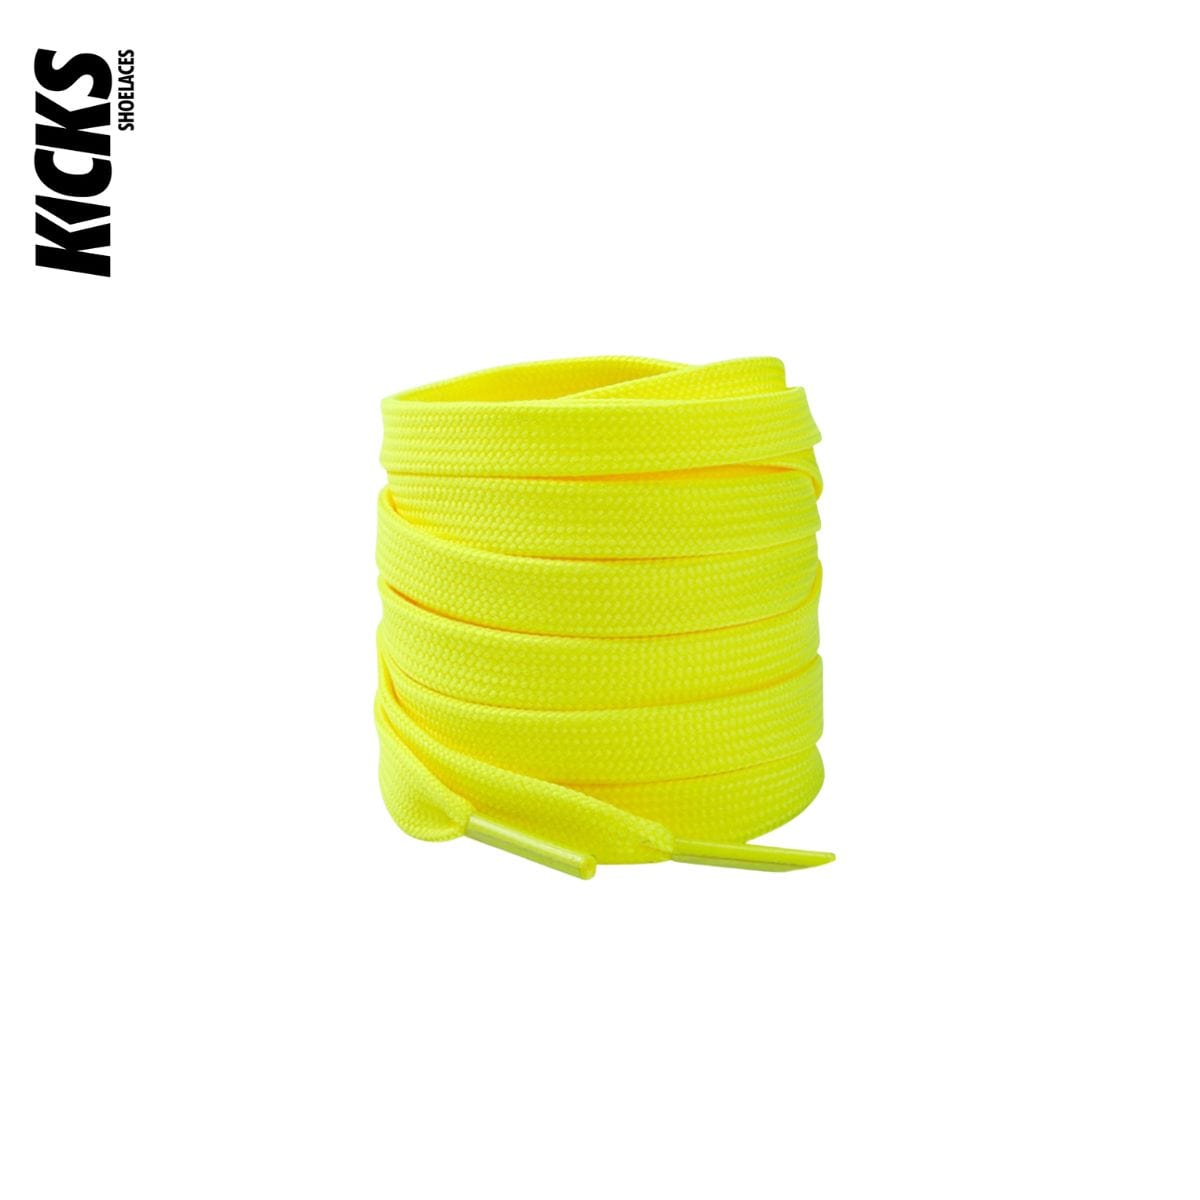 Yellow Replacement Laces for Adidas EQT Sneakers by Kicks Shoelaces